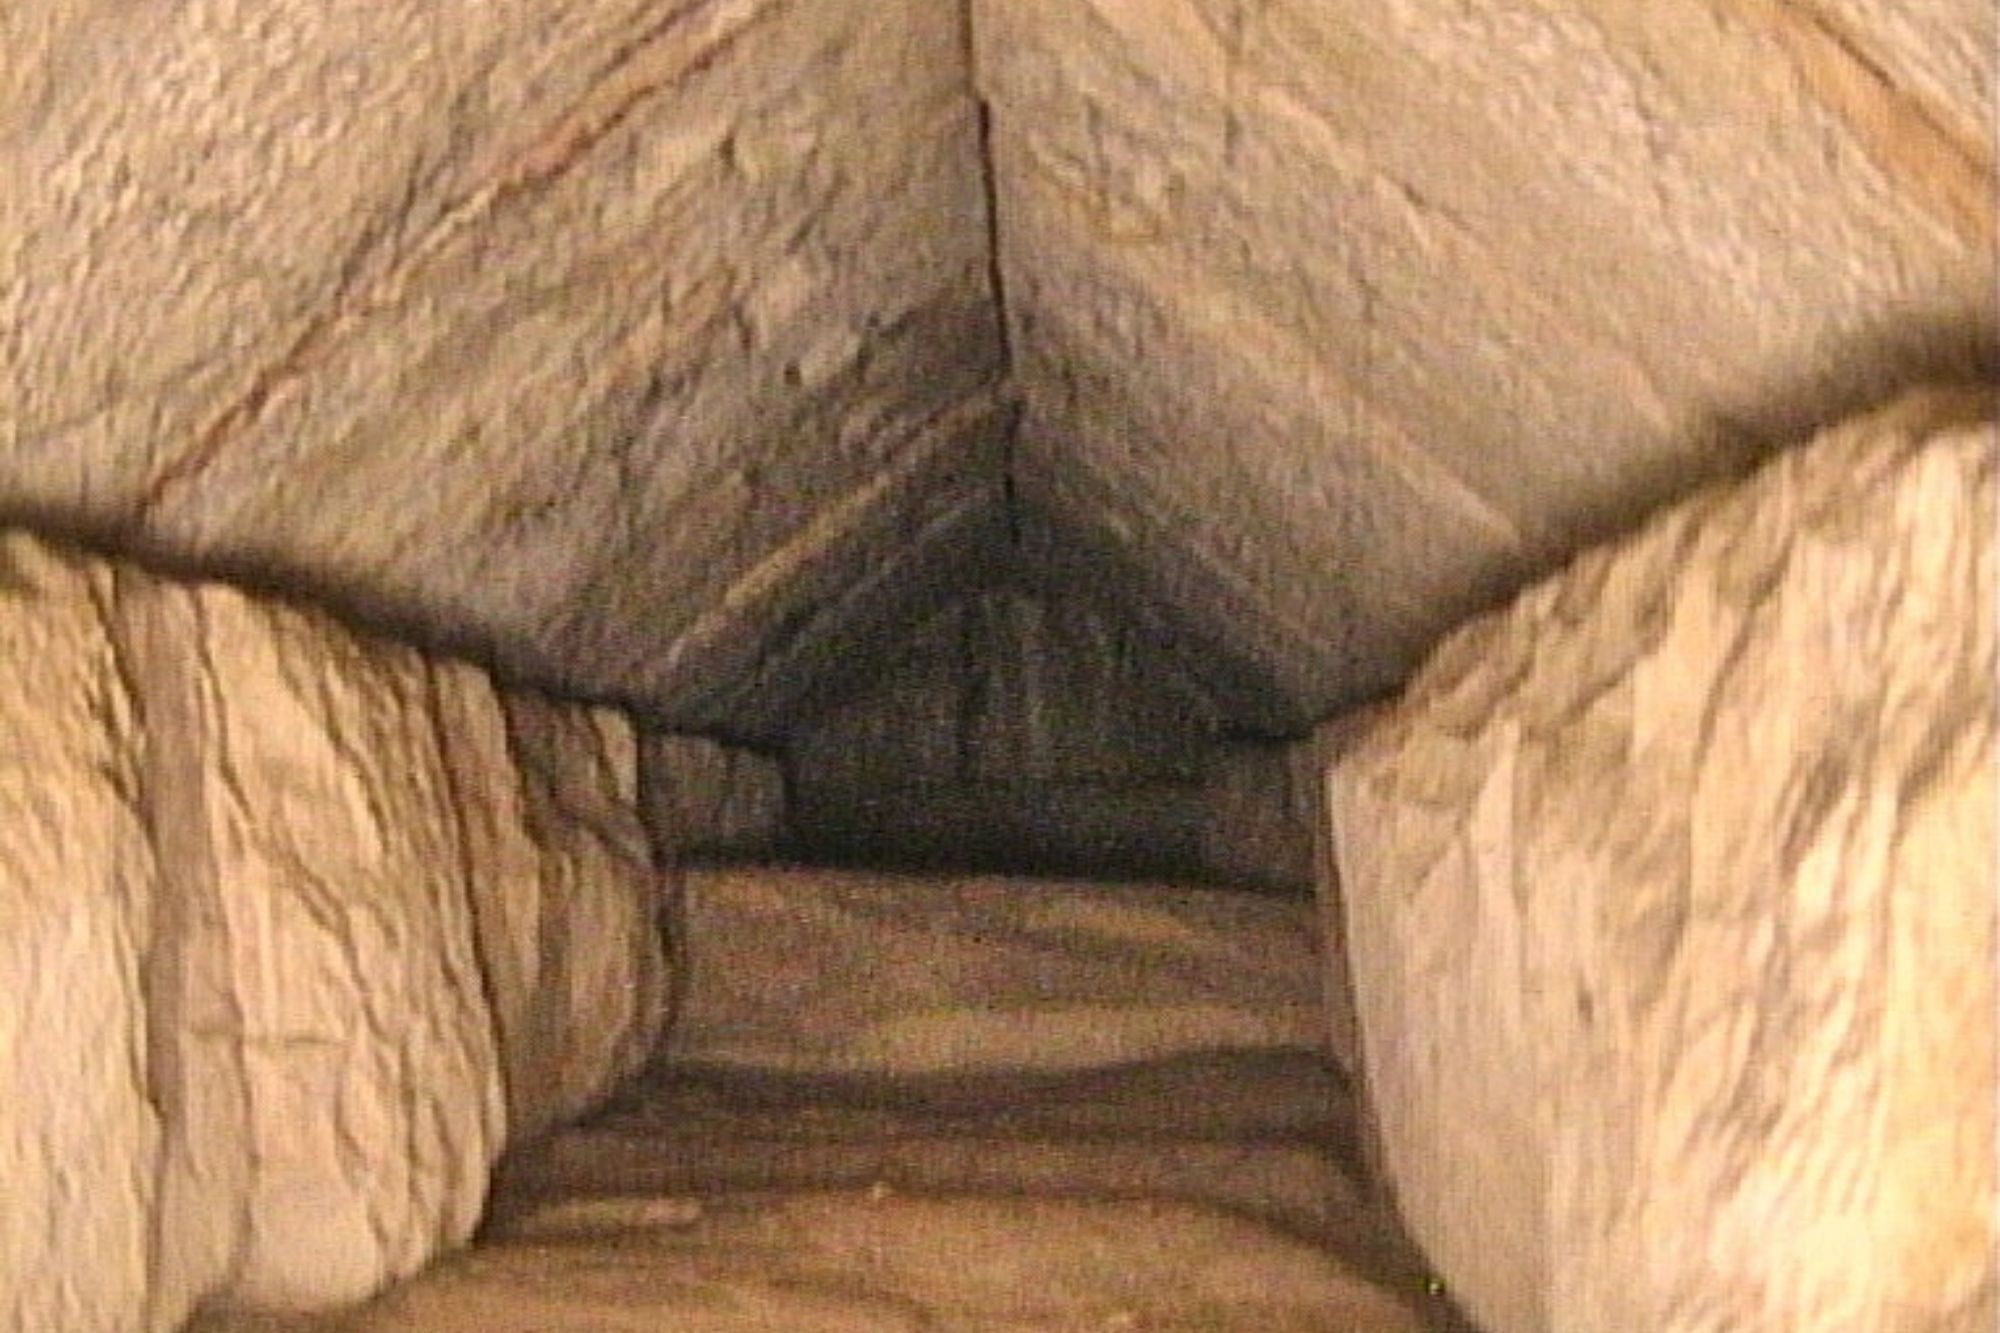 A nine-meter-long secret passageway has been discovered inside the Great Pyramid in Egypt